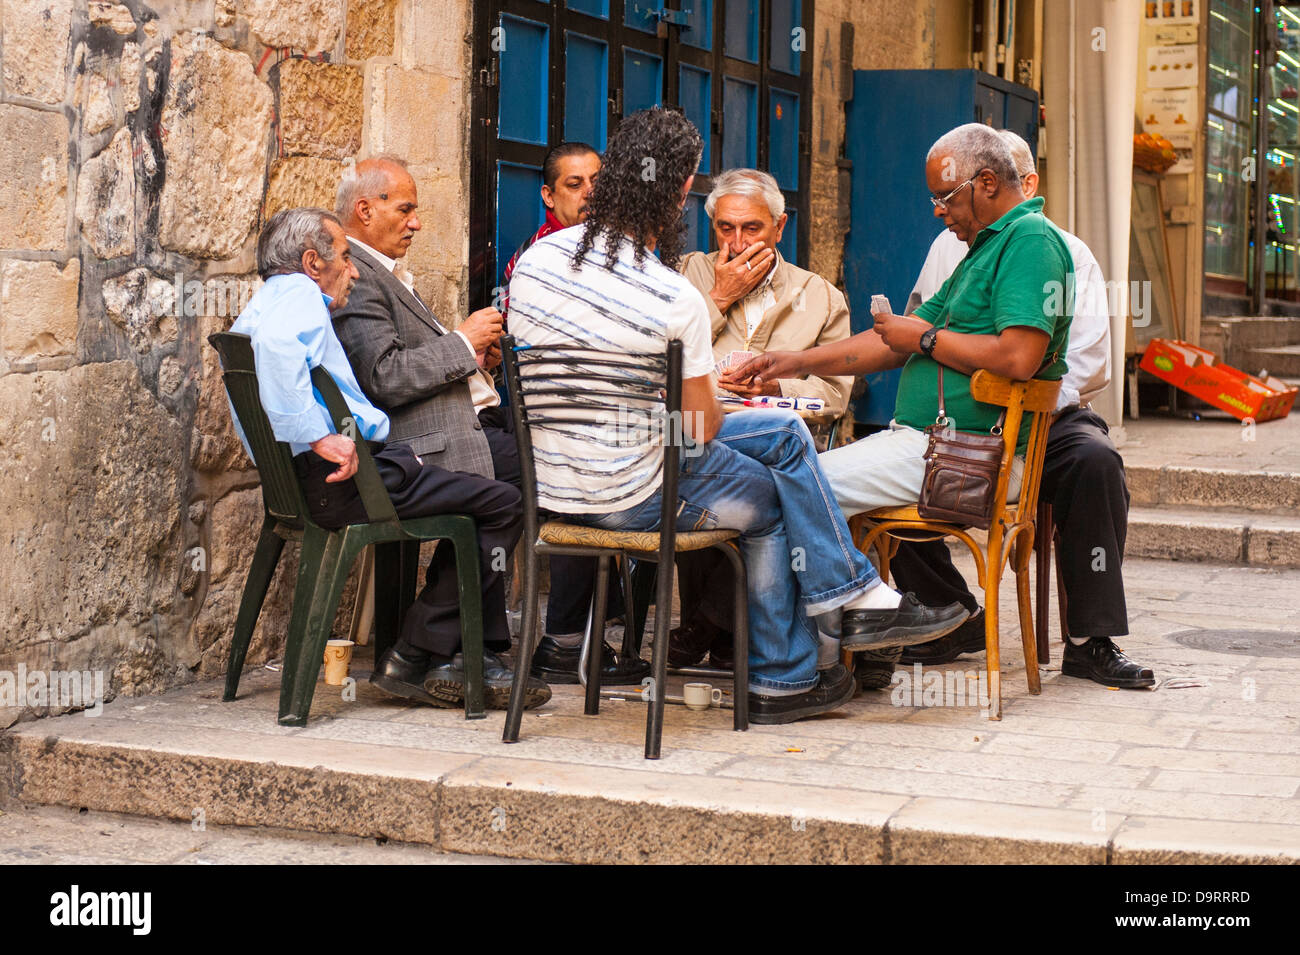 Israel Old City Jerusalem street scene intense group of Arab Muslim men playing cards card game seated around table Stock Photo